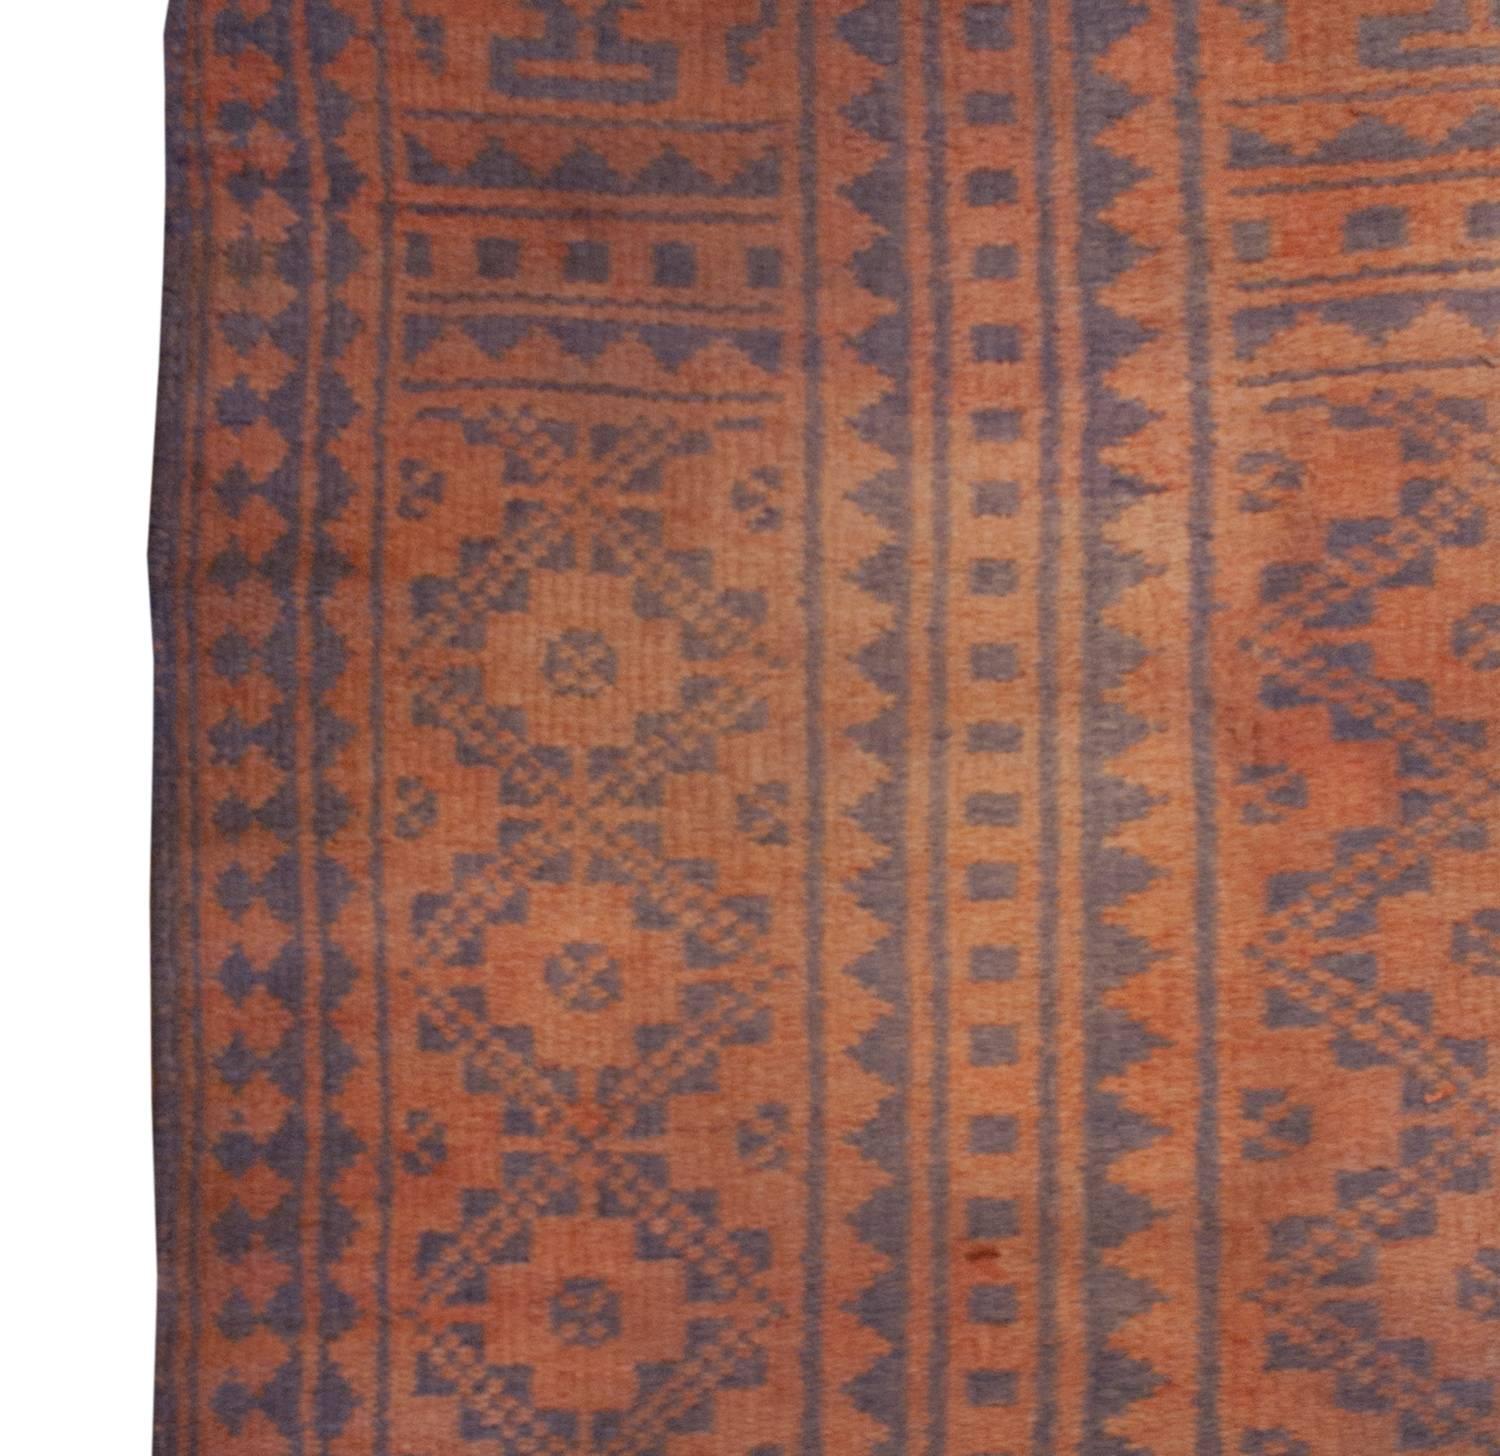 An early 20th century Persian Savek Kilim rug, woven with naturally dyed cotton, with a beautiful all-over geometric lattice-work field of red stylized diamonds on an indigo background. The border is striped, with similarly patterned lattice-work